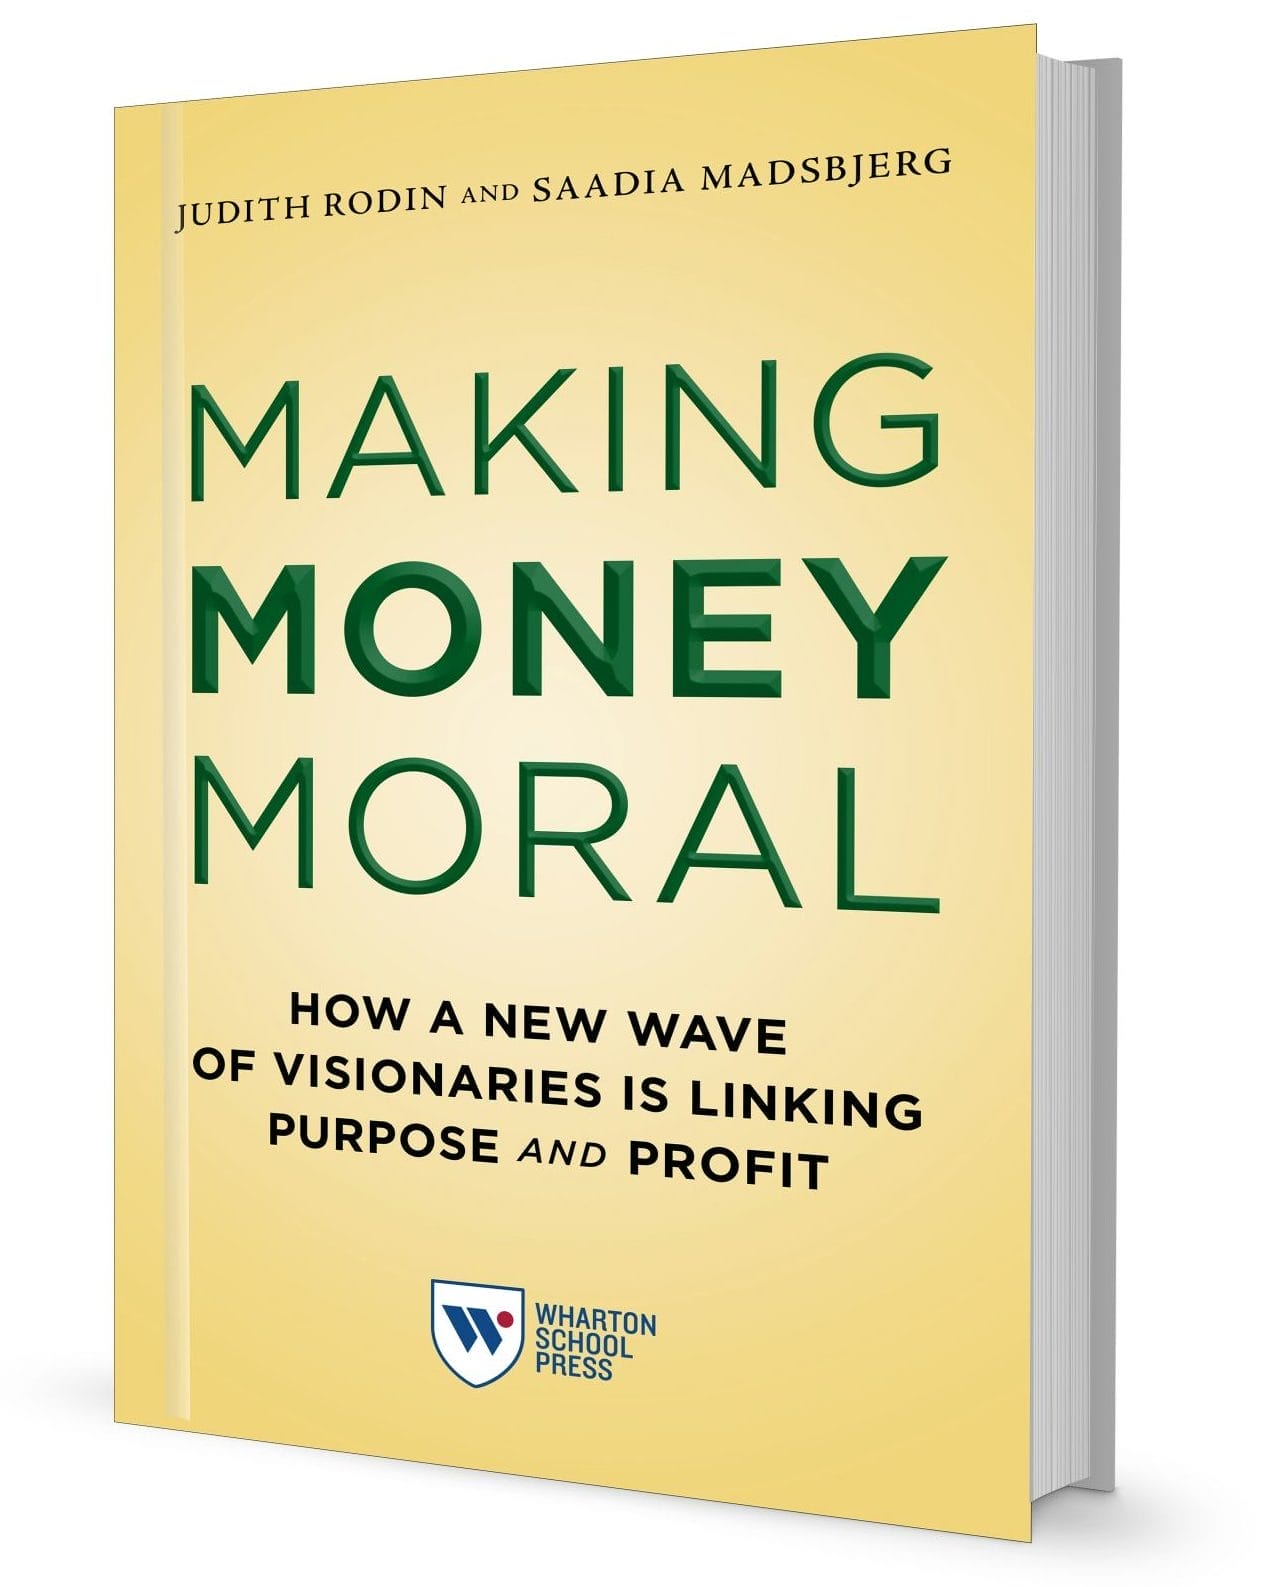 The book Making Money Moral